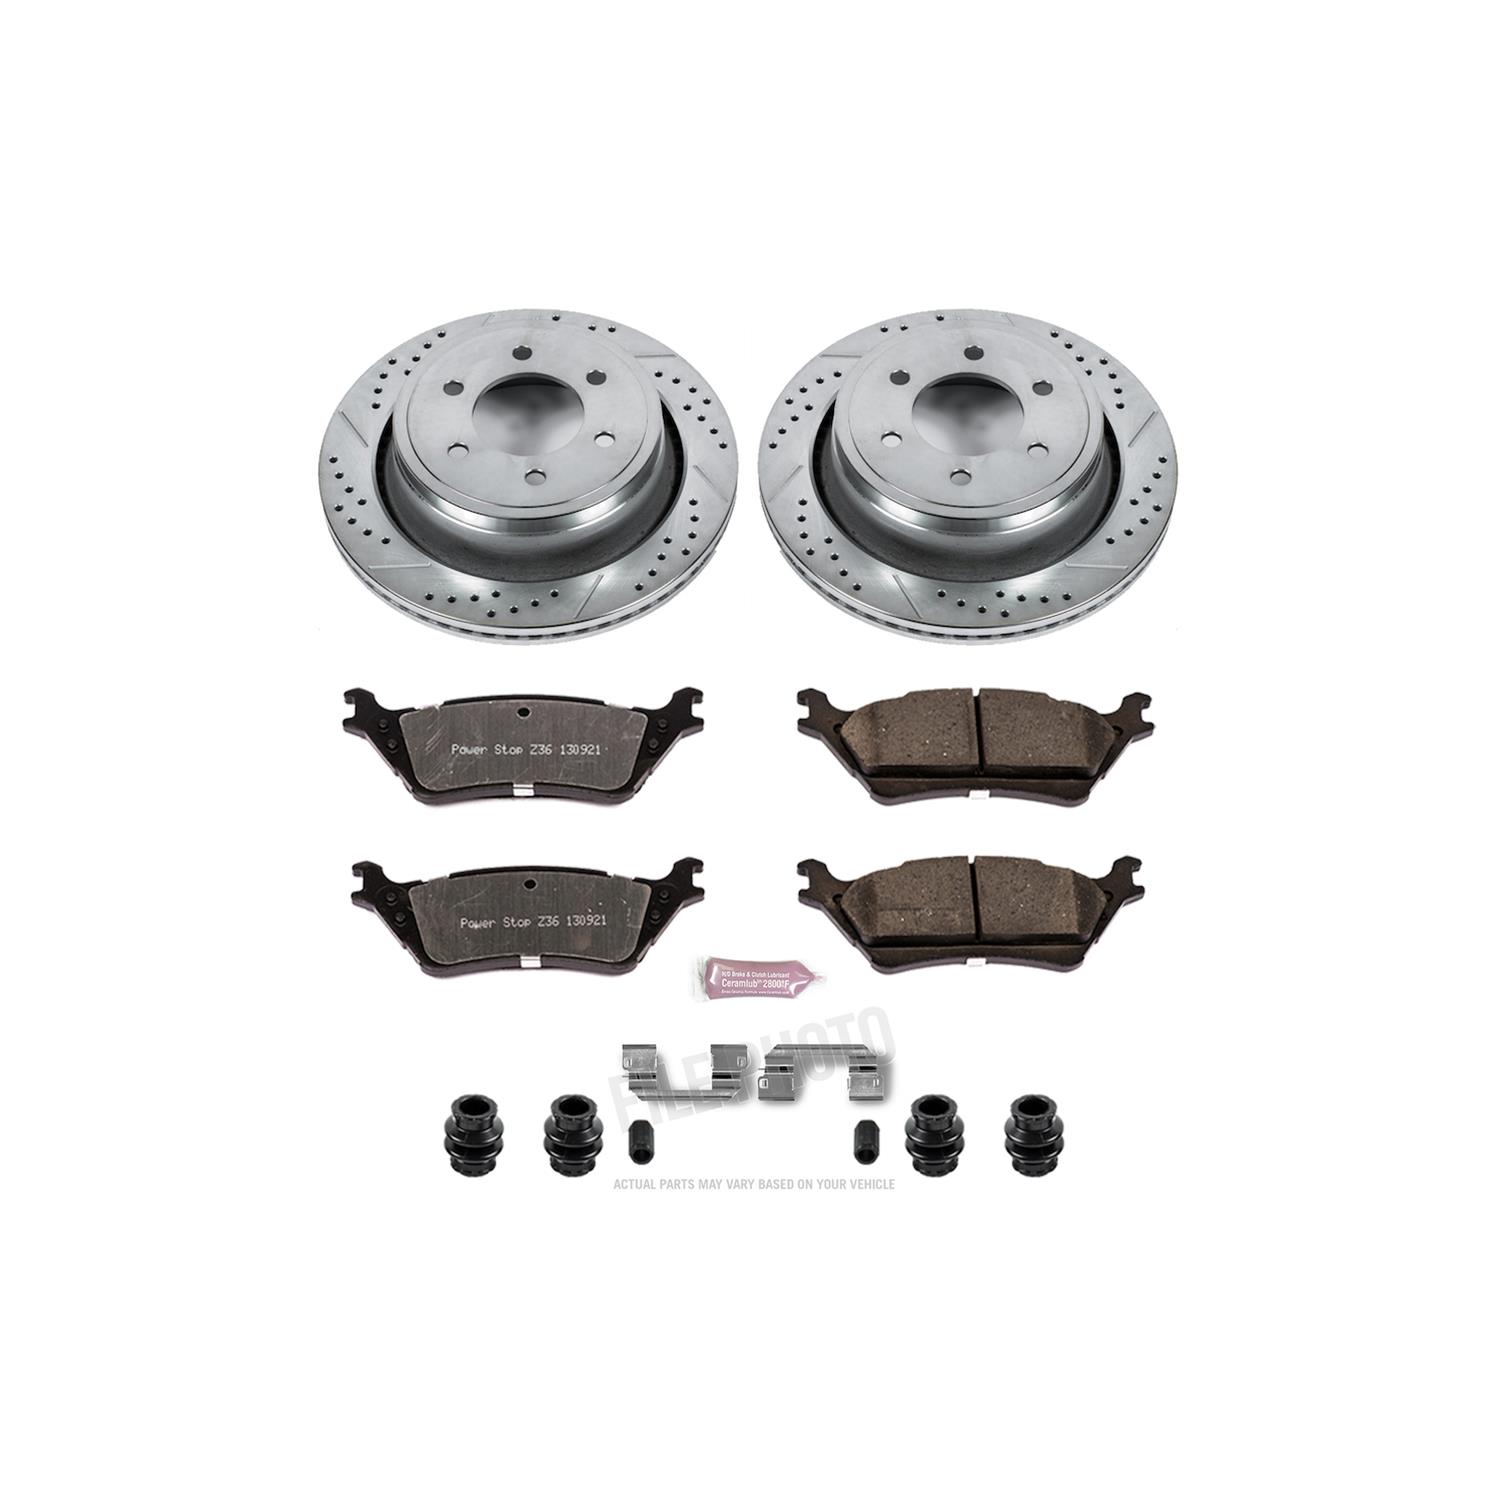 Power Stop K6271-36 Power Stop Z36 Truck and Tow Brake Upgrade Kits |  Summit Racing